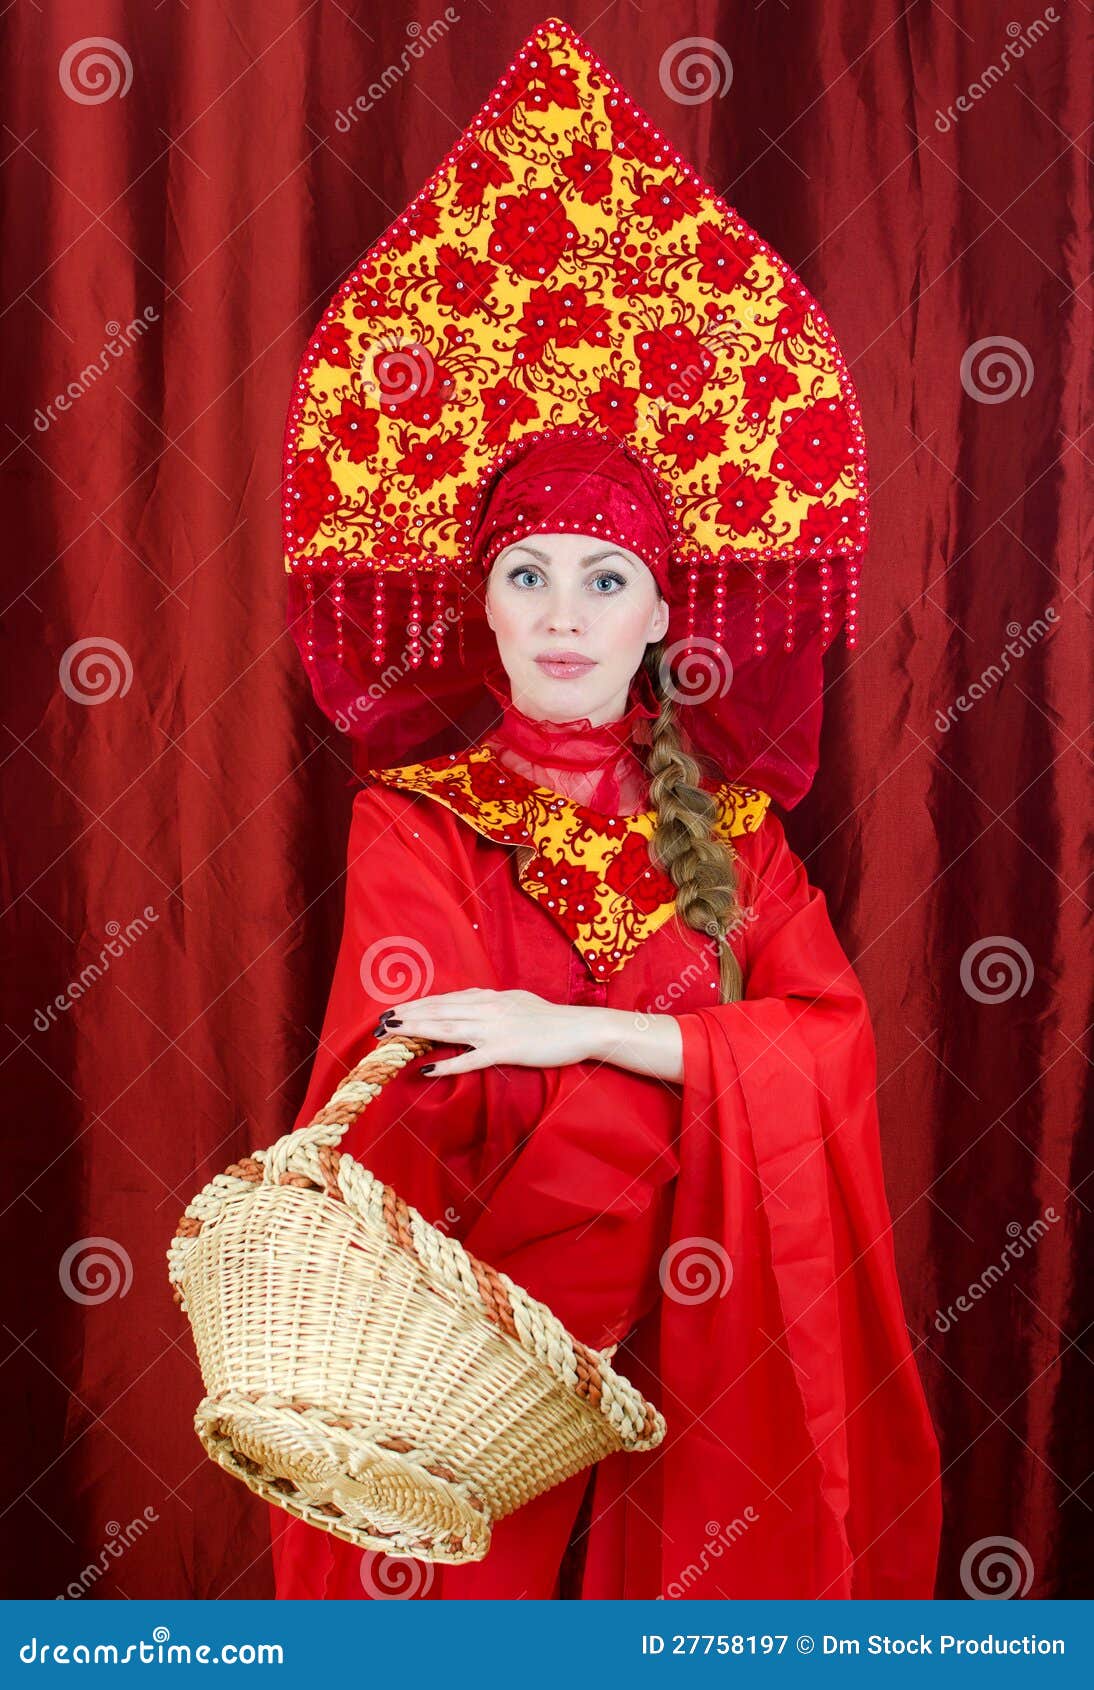 Woman In Russian Traditional Clothes Stock Image - Image: 27758197